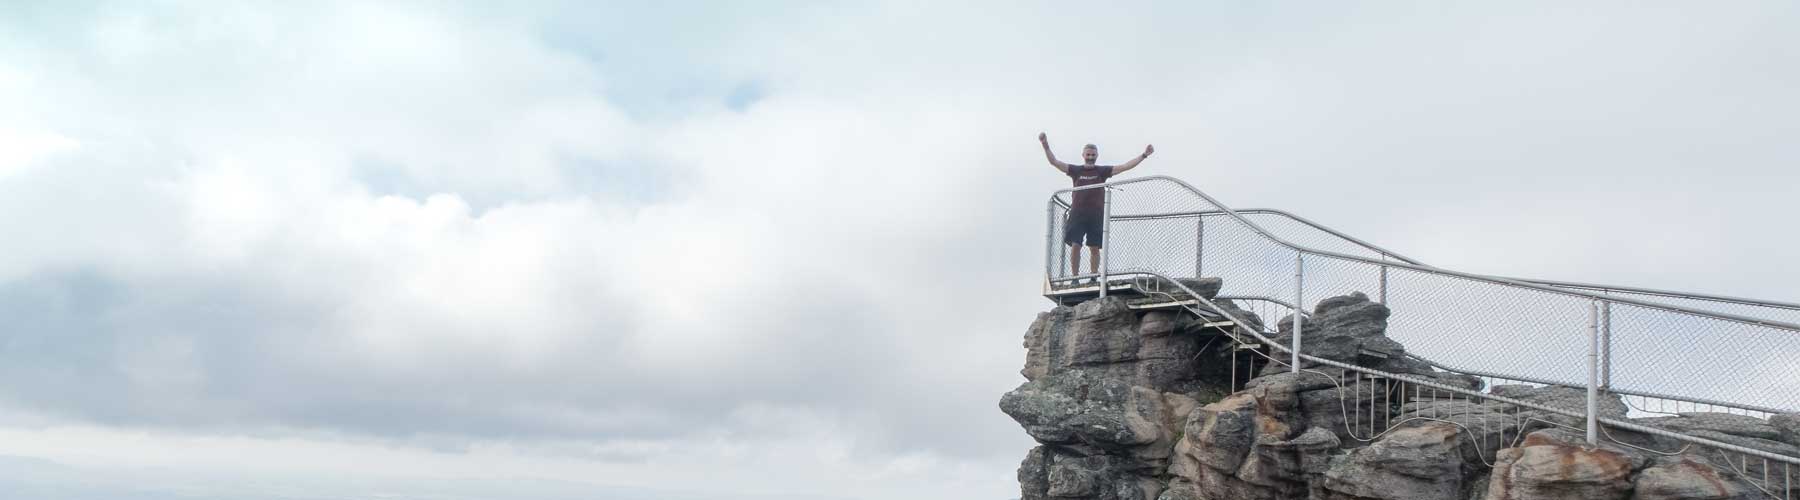 A person standing with hands in the air triumphantly atop a mountain, behind safety railing